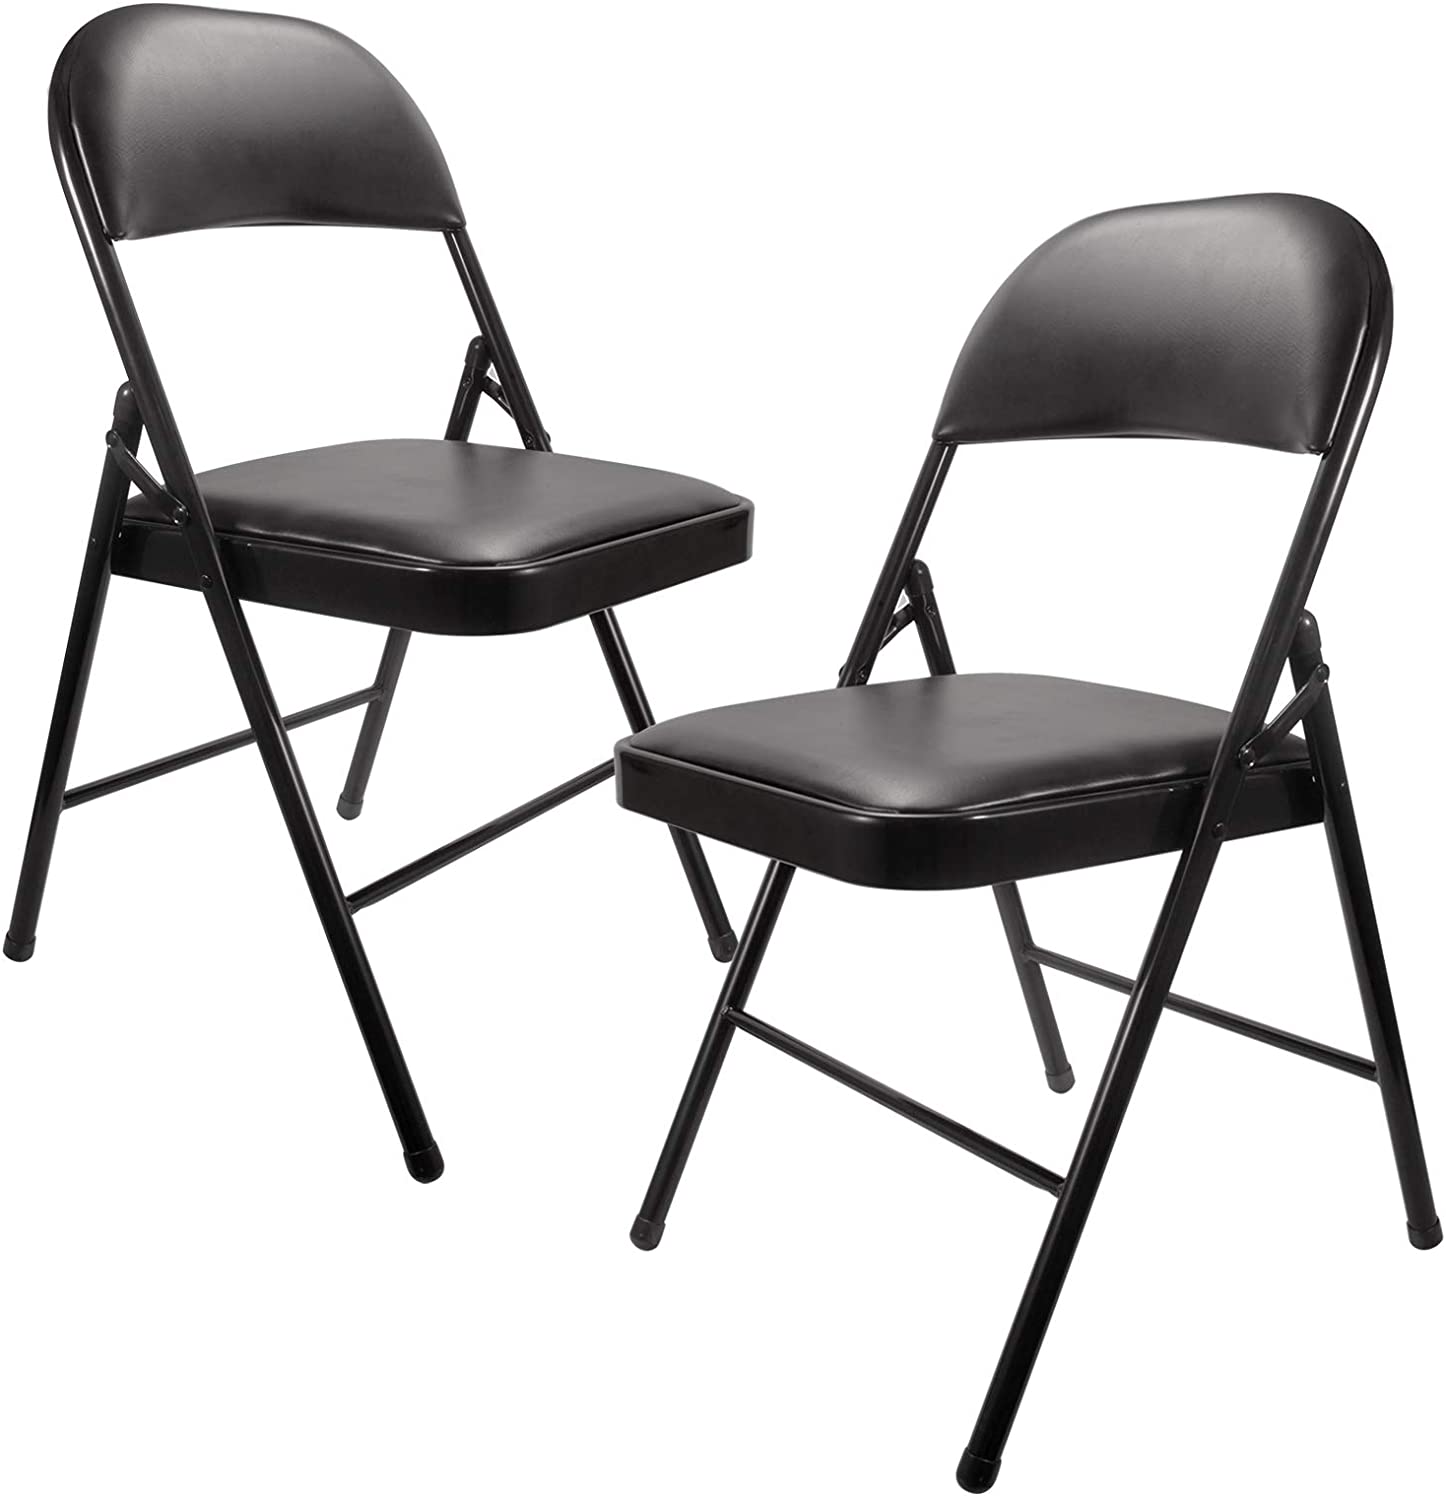 High Quality Furniture Folding Chair with Metal Frame Black Folding Chairs with Padded Seats